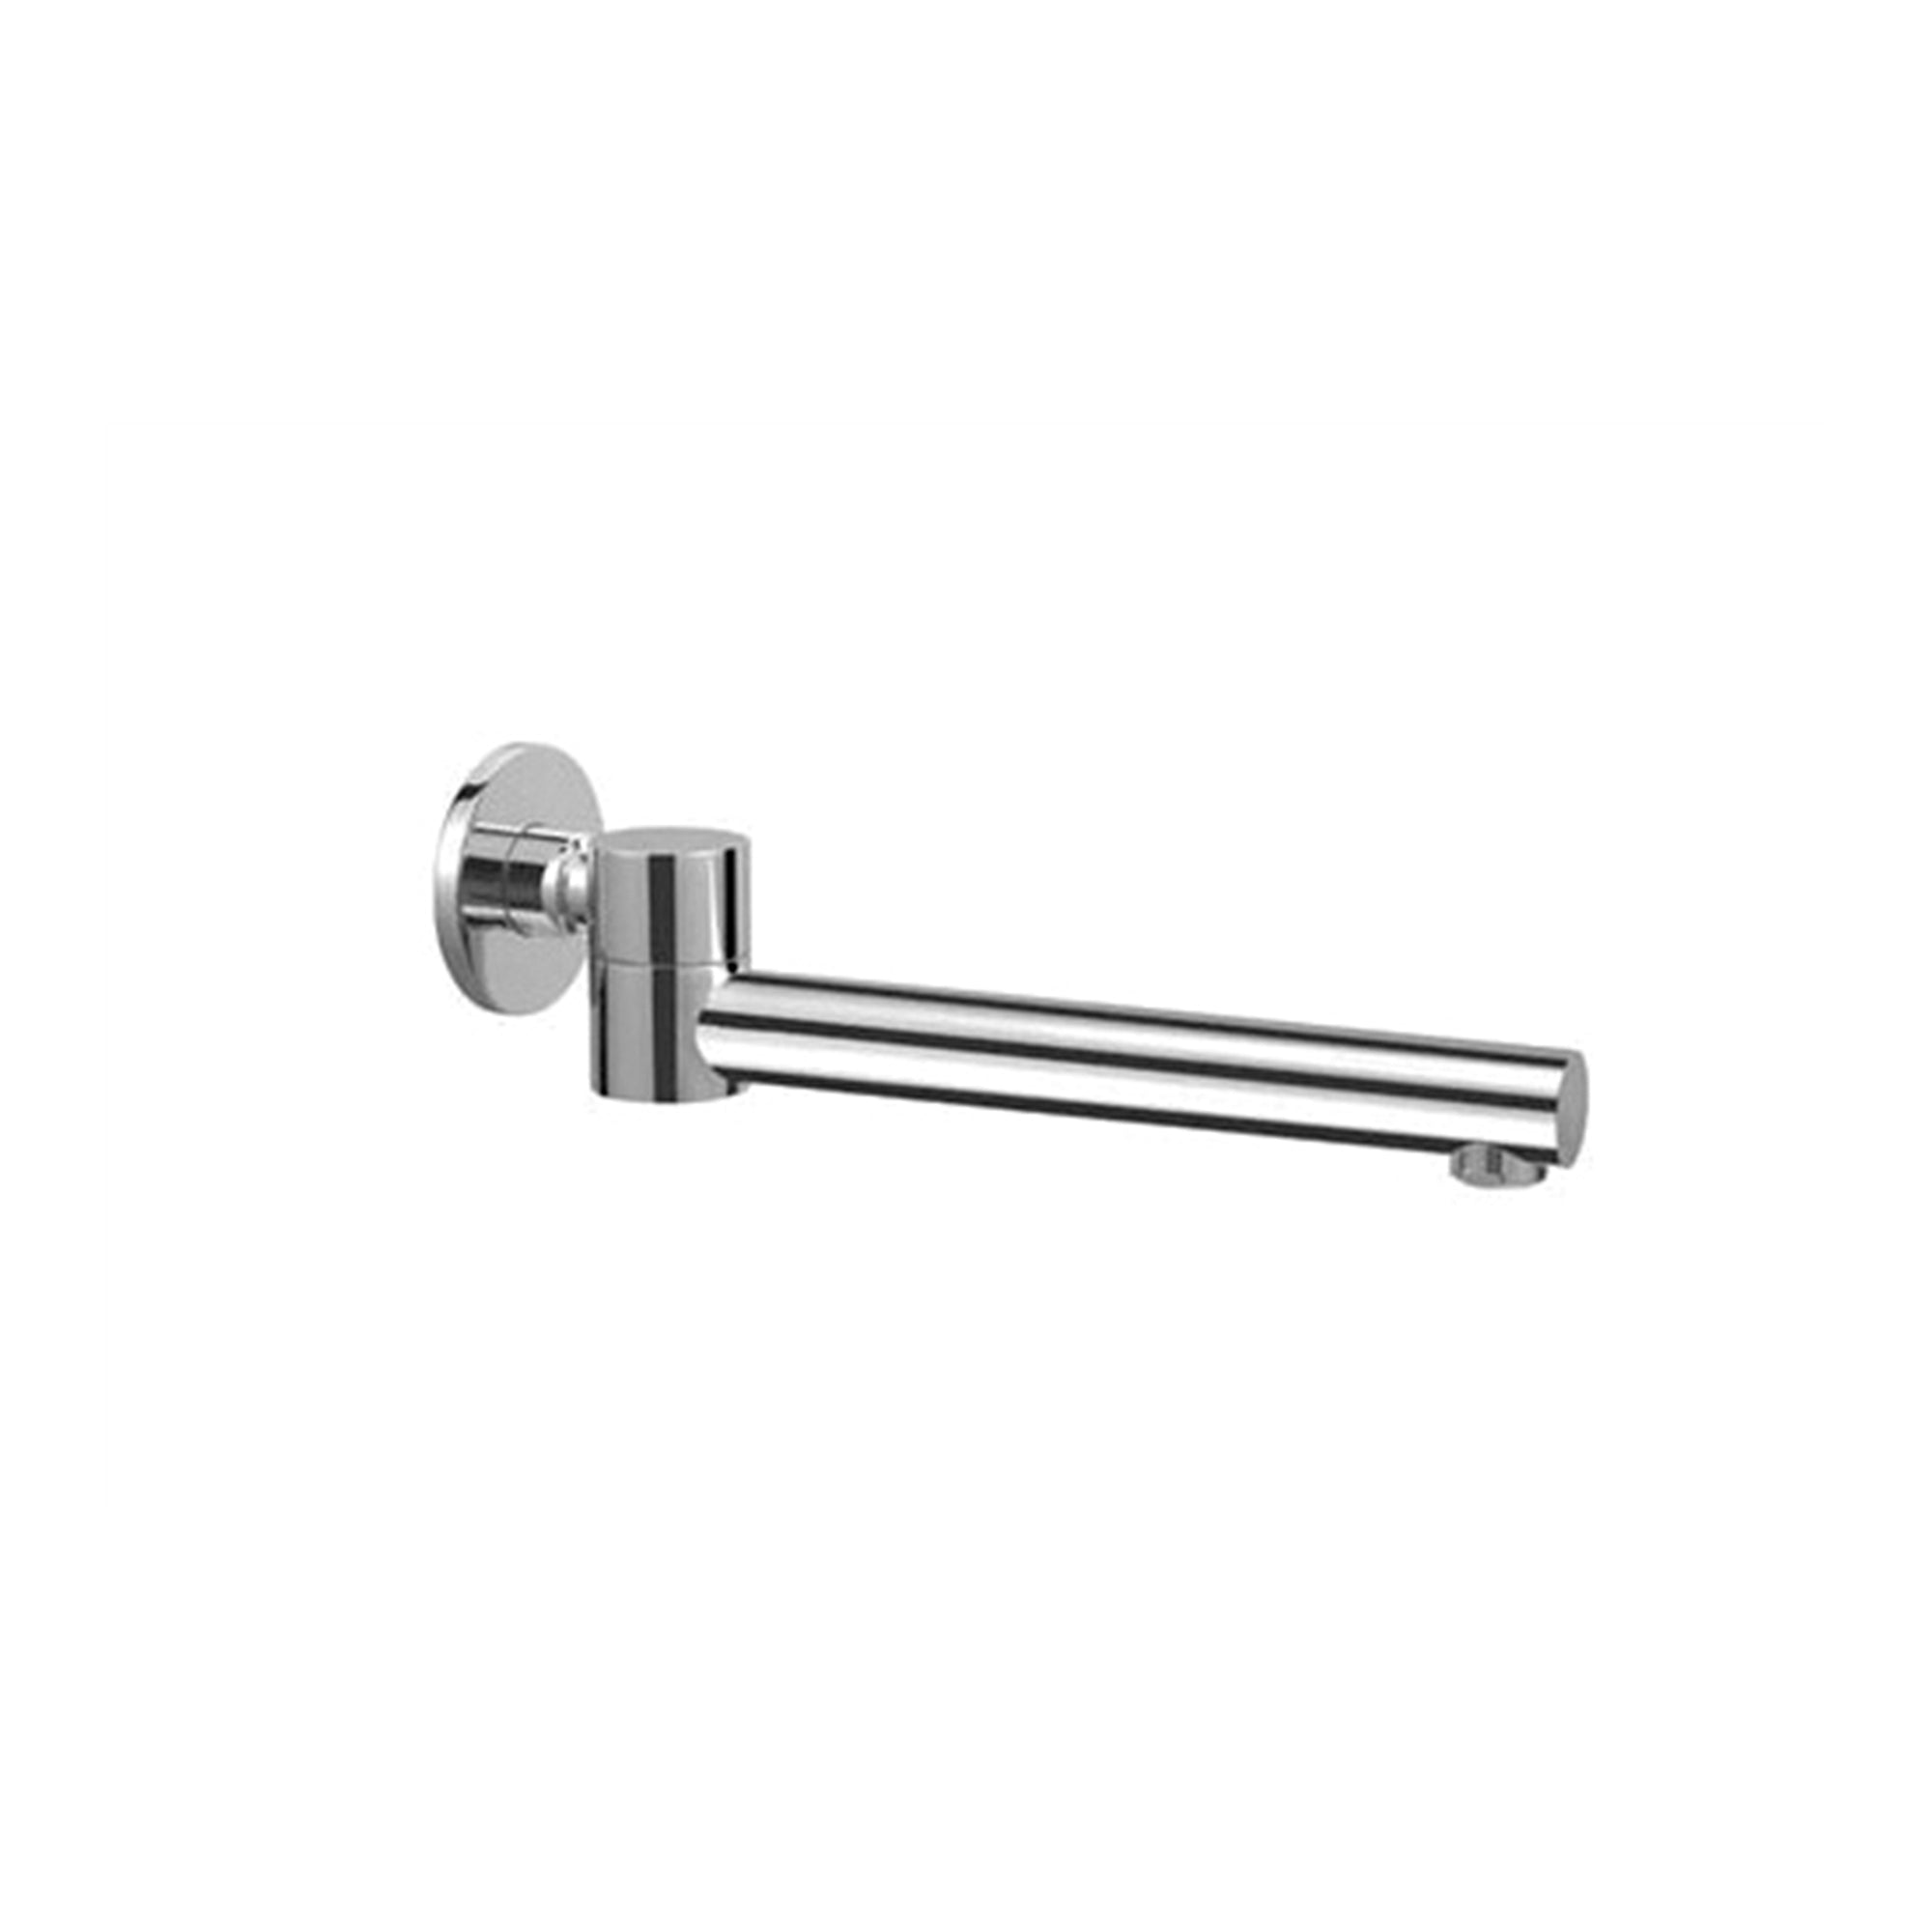 DOLCE WALL MOUNTED SWIVEL BATH SPOUT ONLY CHROME